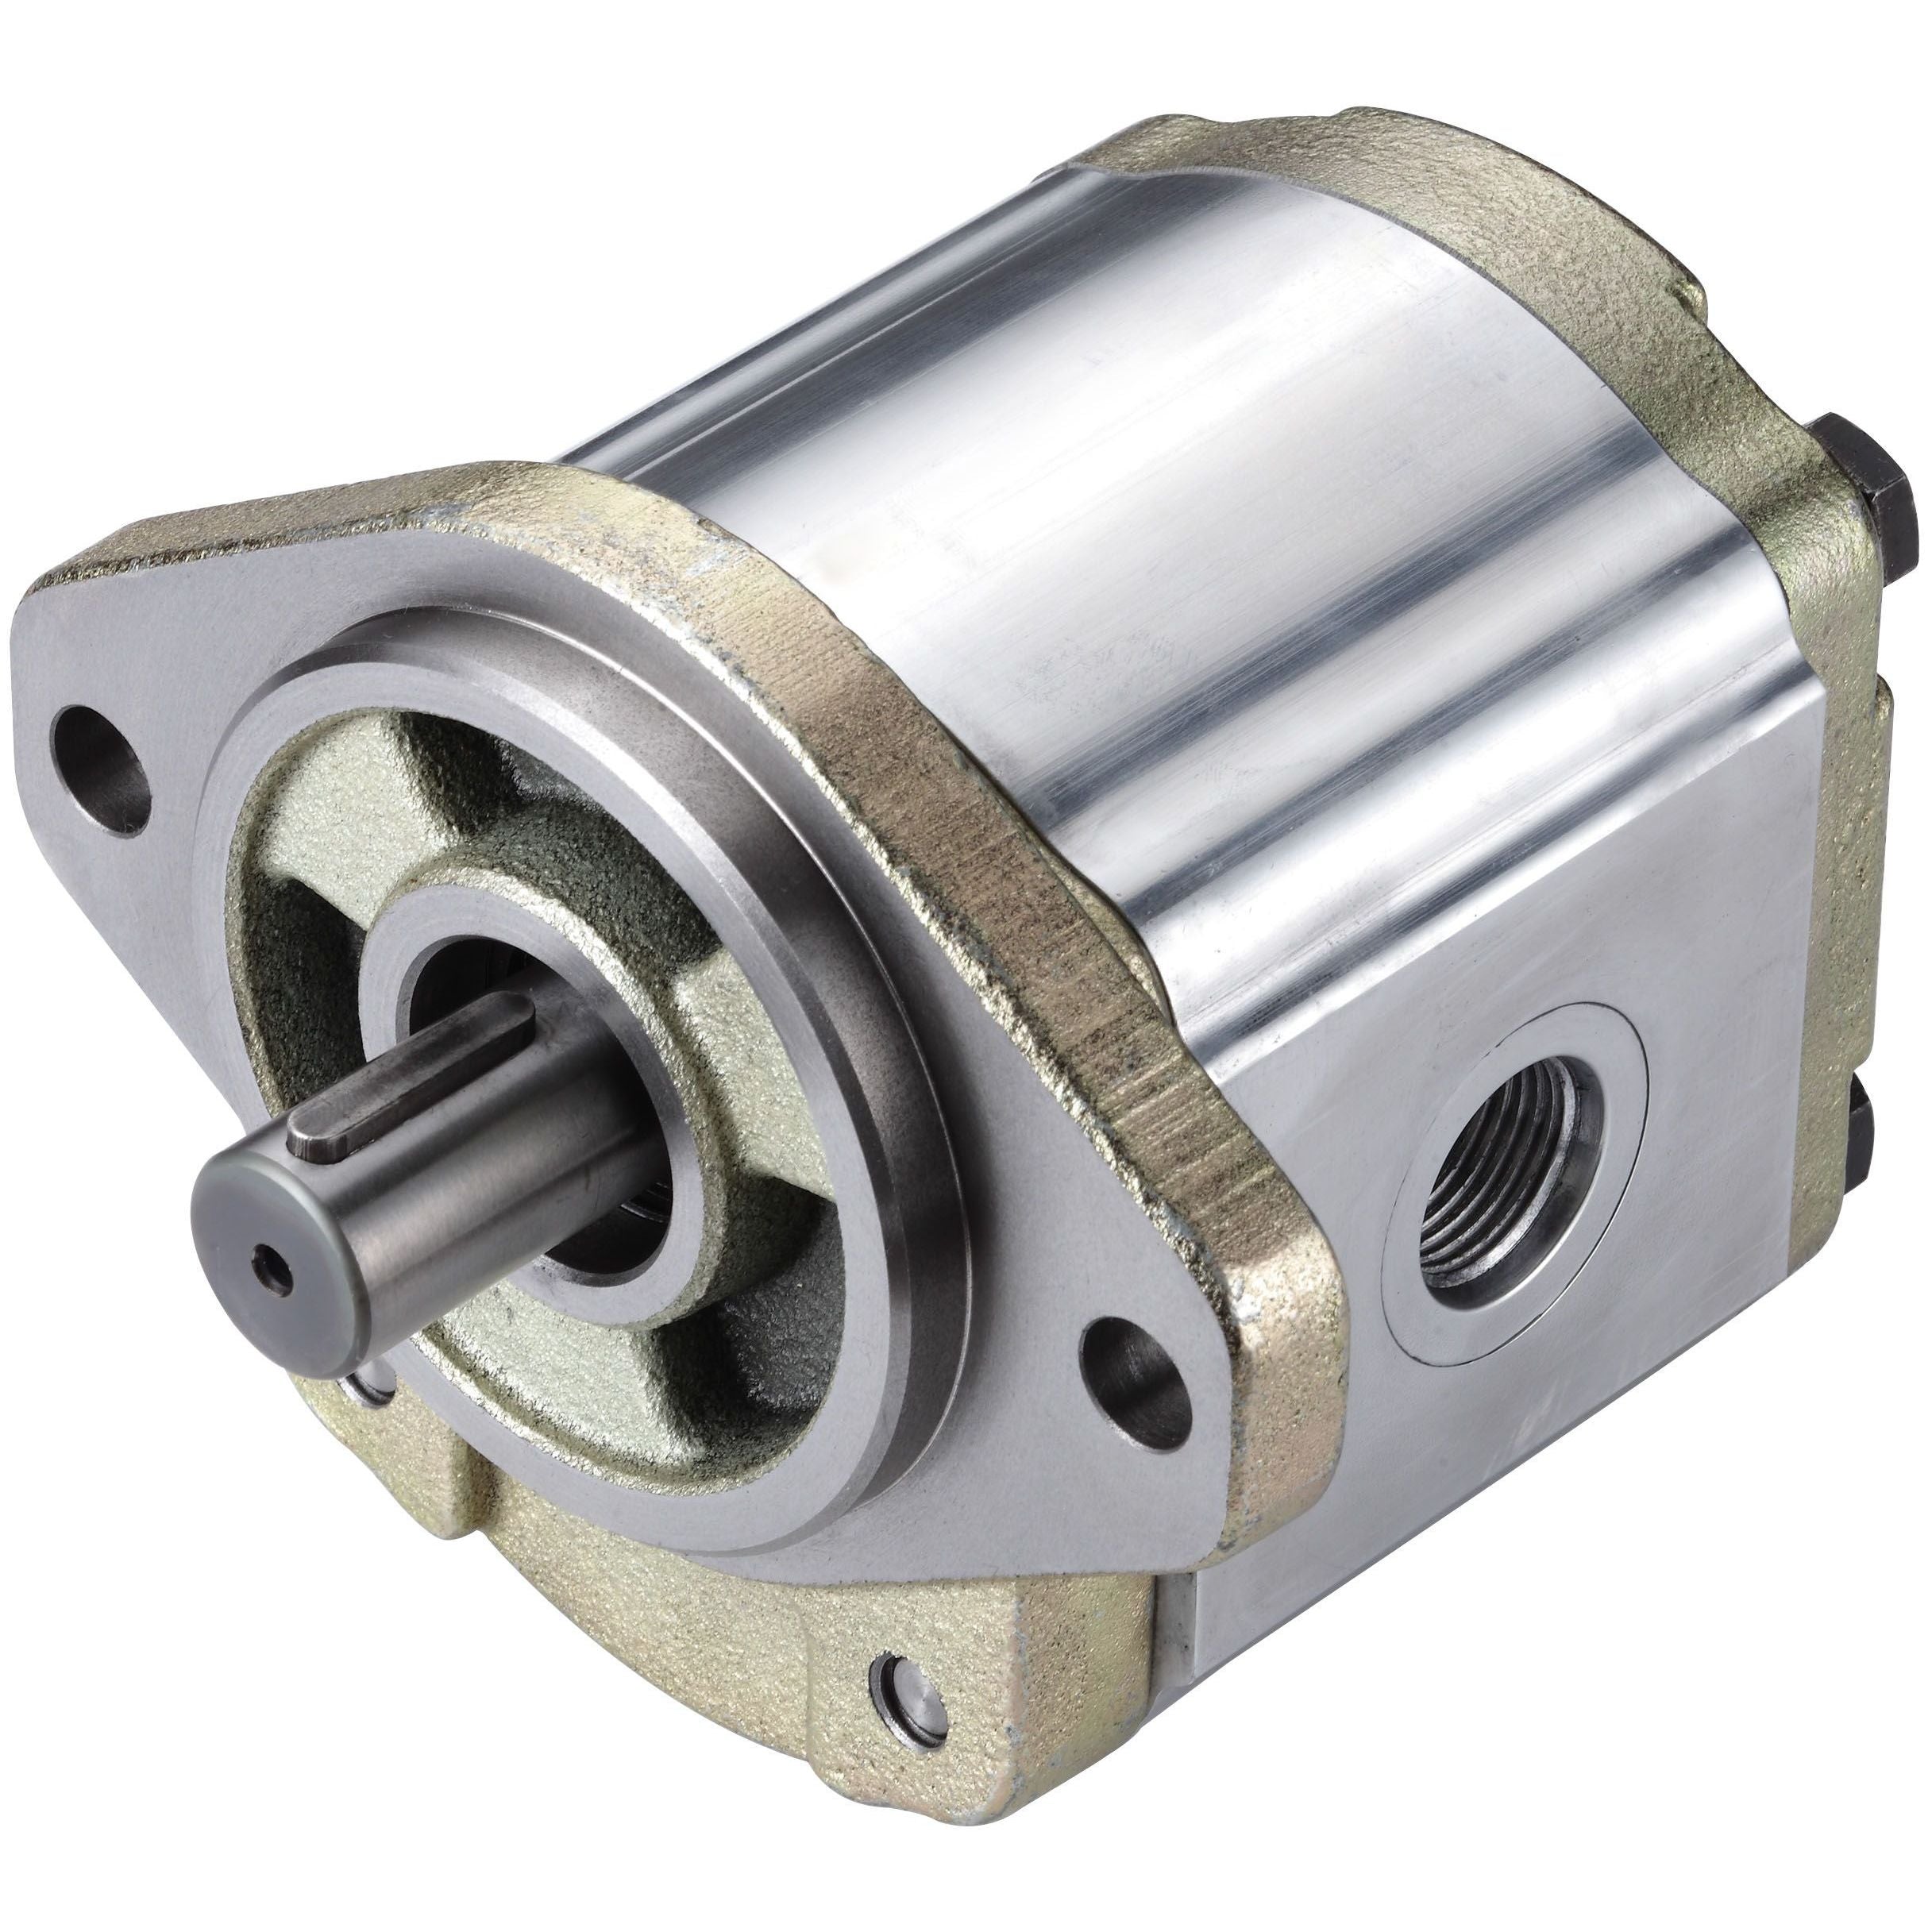 3GB8U260L : Honor Gear Pump, CCW Rotation, 60cc (3.66in3), 28.53 GPM, 2600psi, 2500 RPM, #20 SAE (1.25") In, #12 SAE (3/4") Out, Splined Shaft 13-Tooth, 16/32 Pitch, SAE B 2-Bolt Mount